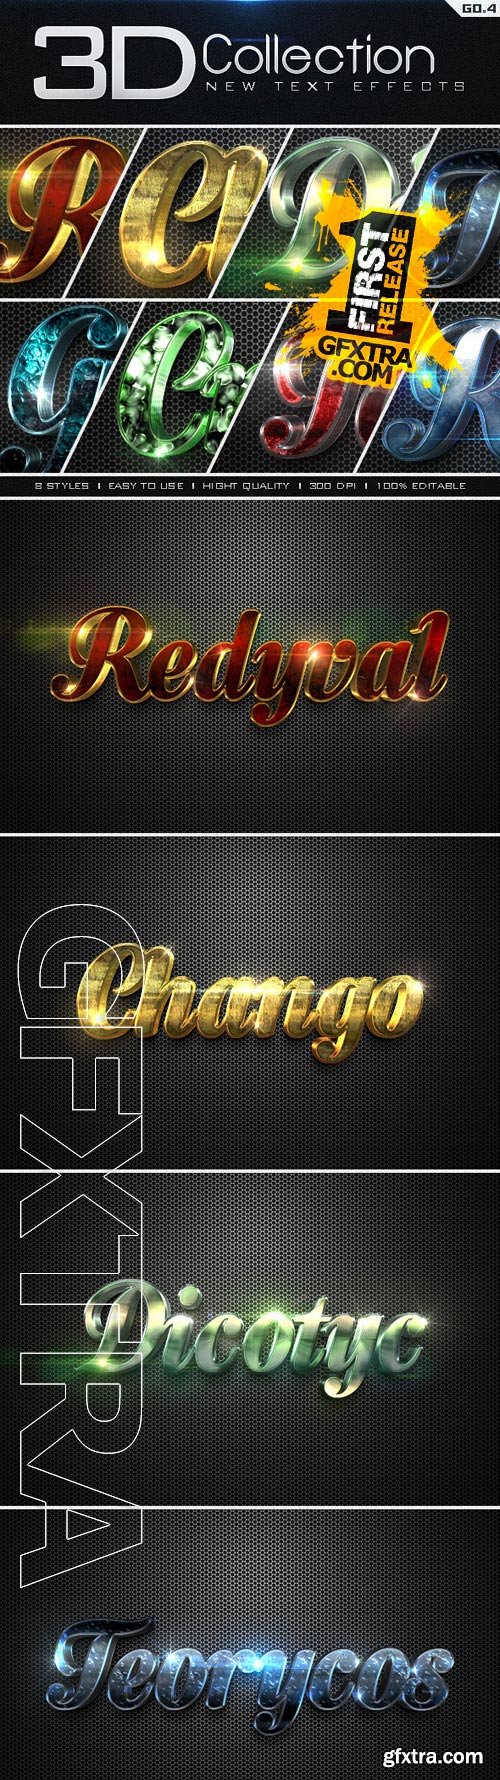 GraphicRiver - New 3D Collection Text Effects GO.4 9674249